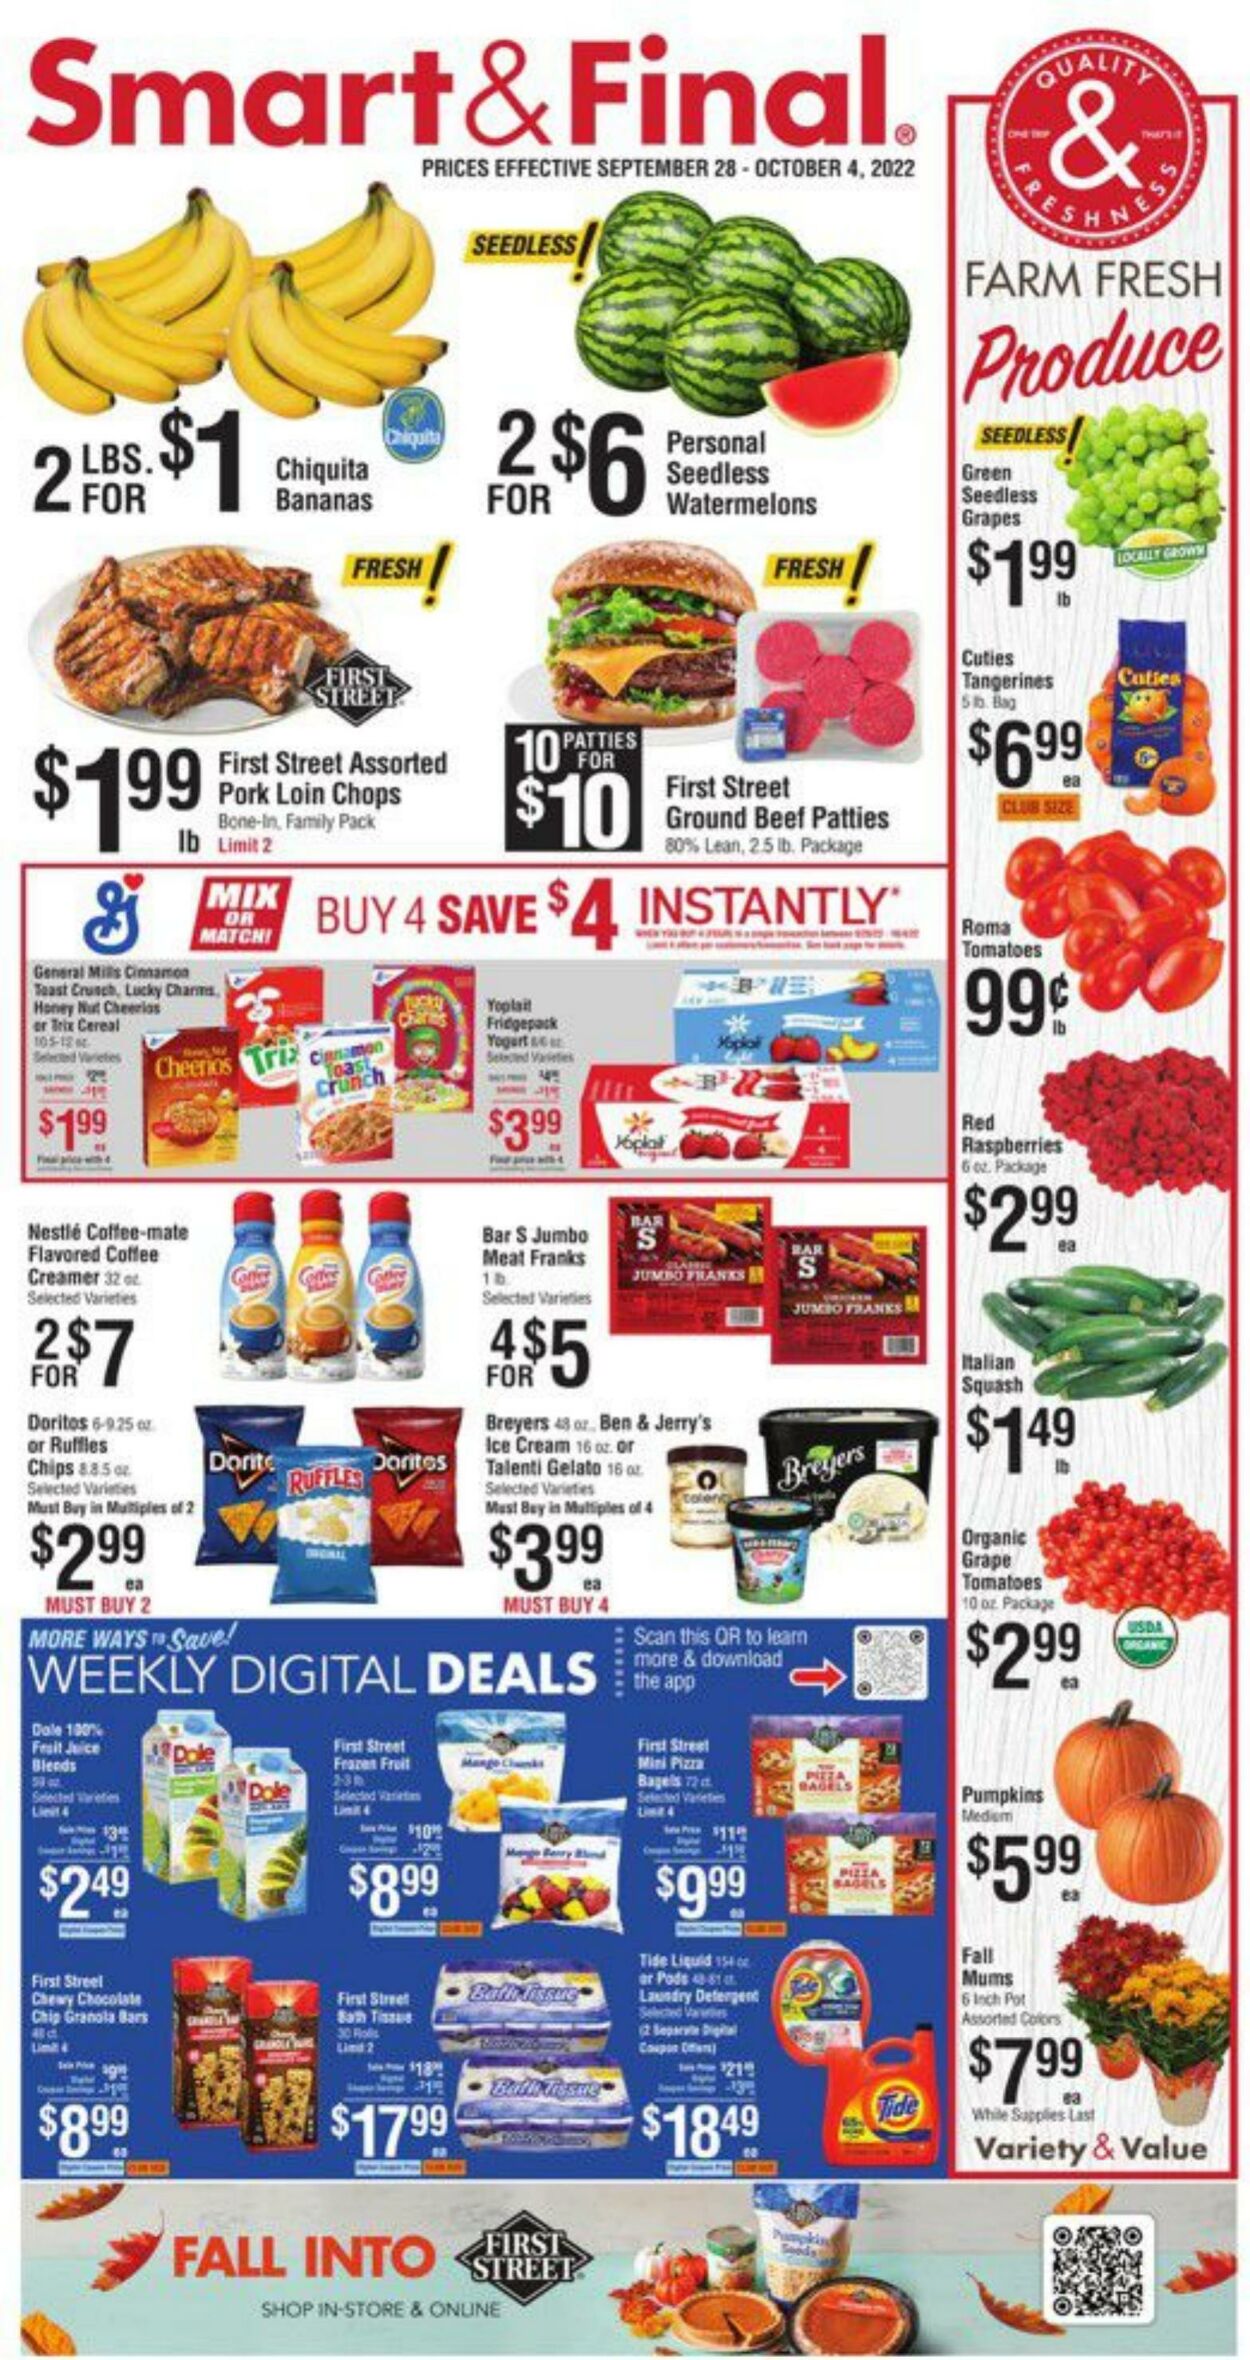 Smart and Final Promotional weekly ads